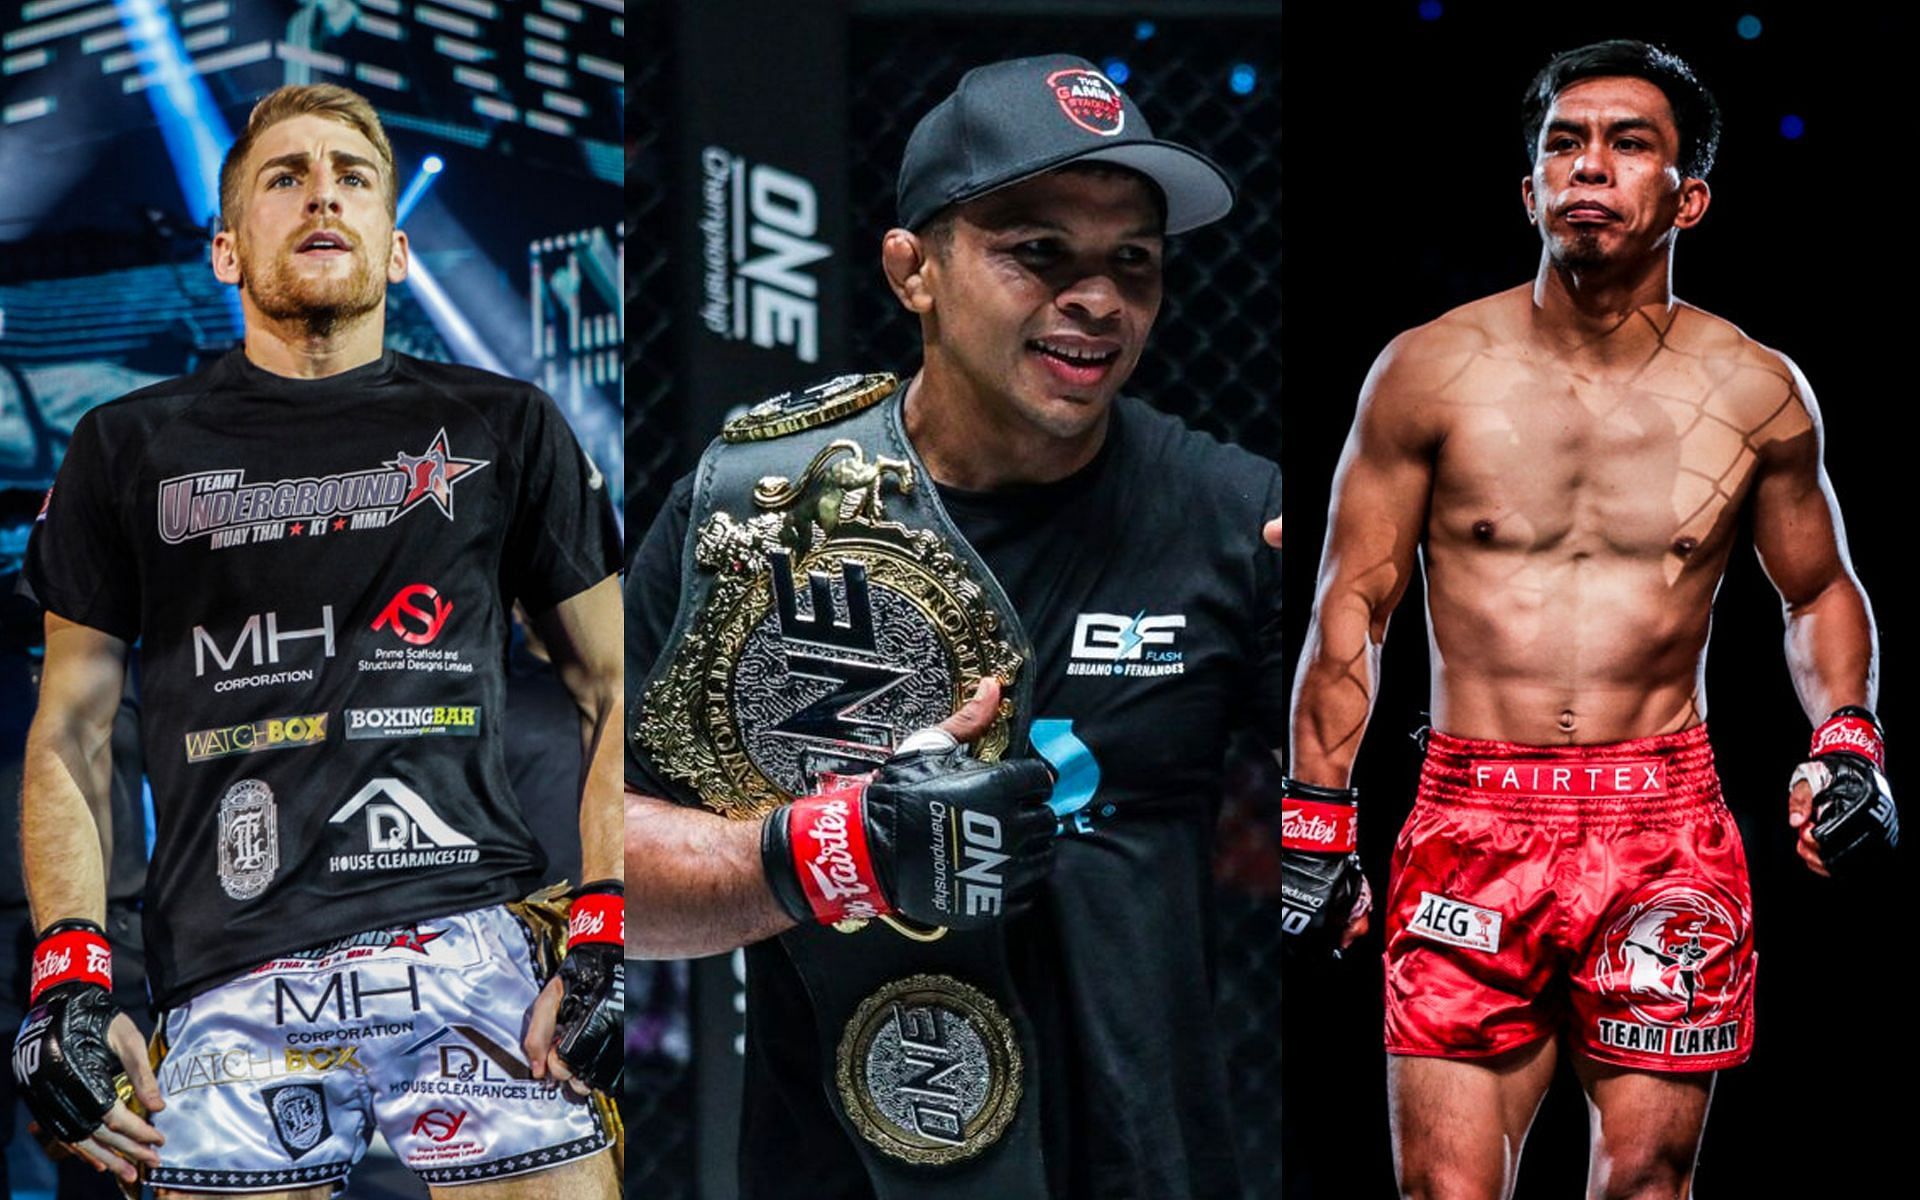 From left to right: Jonathan Haggerty, Bibiano Fernandes, Kevin Belingon. [Photos ONE Championship]